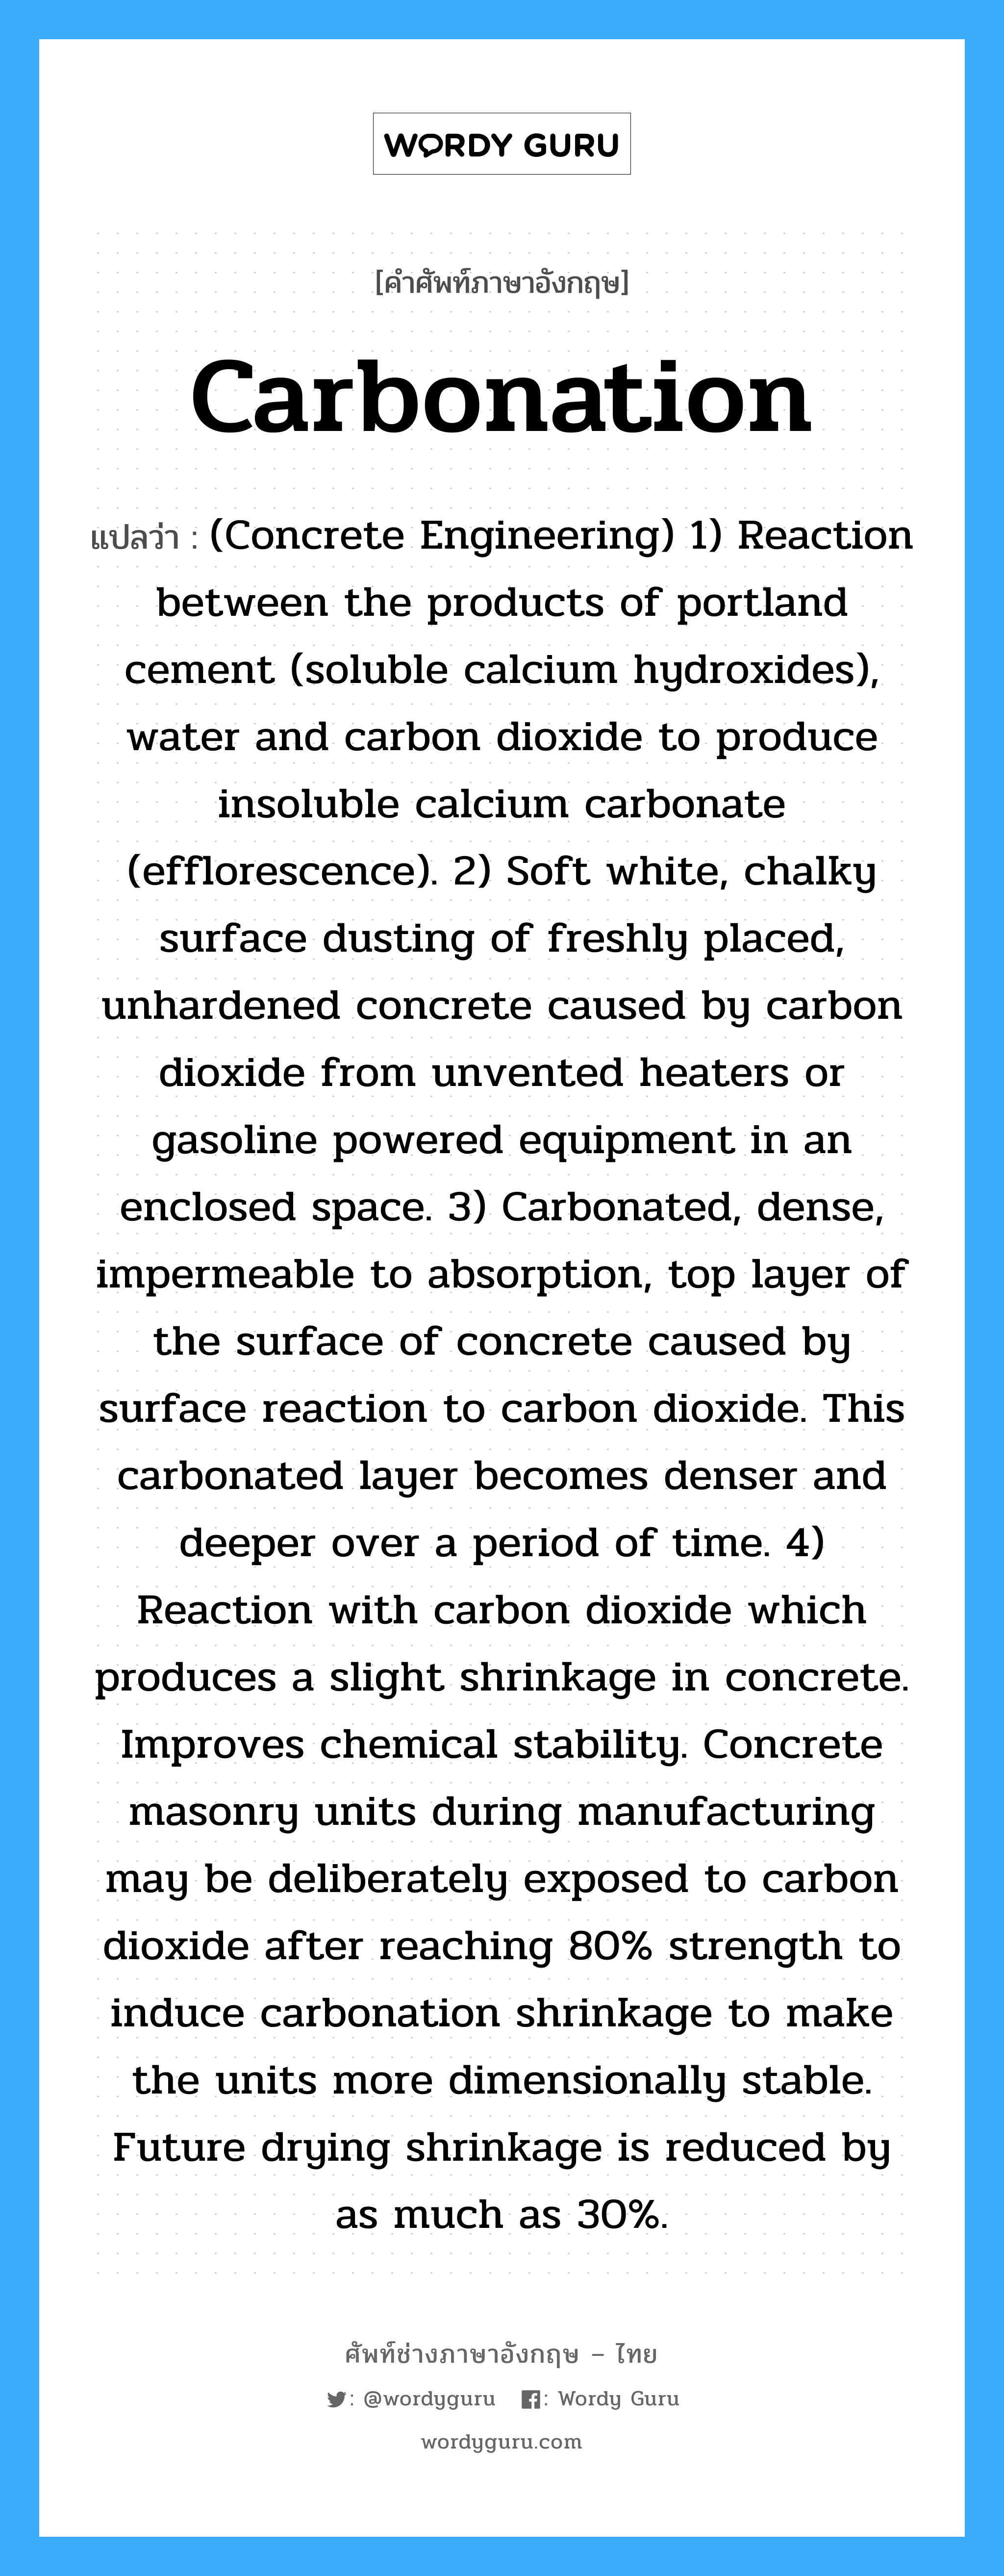 Carbonation แปลว่า?, คำศัพท์ช่างภาษาอังกฤษ - ไทย Carbonation คำศัพท์ภาษาอังกฤษ Carbonation แปลว่า (Concrete Engineering) 1) Reaction between the products of portland cement (soluble calcium hydroxides), water and carbon dioxide to produce insoluble calcium carbonate (efflorescence). 2) Soft white, chalky surface dusting of freshly placed, unhardened concrete caused by carbon dioxide from unvented heaters or gasoline powered equipment in an enclosed space. 3) Carbonated, dense, impermeable to absorption, top layer of the surface of concrete caused by surface reaction to carbon dioxide. This carbonated layer becomes denser and deeper over a period of time. 4) Reaction with carbon dioxide which produces a slight shrinkage in concrete. Improves chemical stability. Concrete masonry units during manufacturing may be deliberately exposed to carbon dioxide after reaching 80% strength to induce carbonation shrinkage to make the units more dimensionally stable. Future drying shrinkage is reduced by as much as 30%.